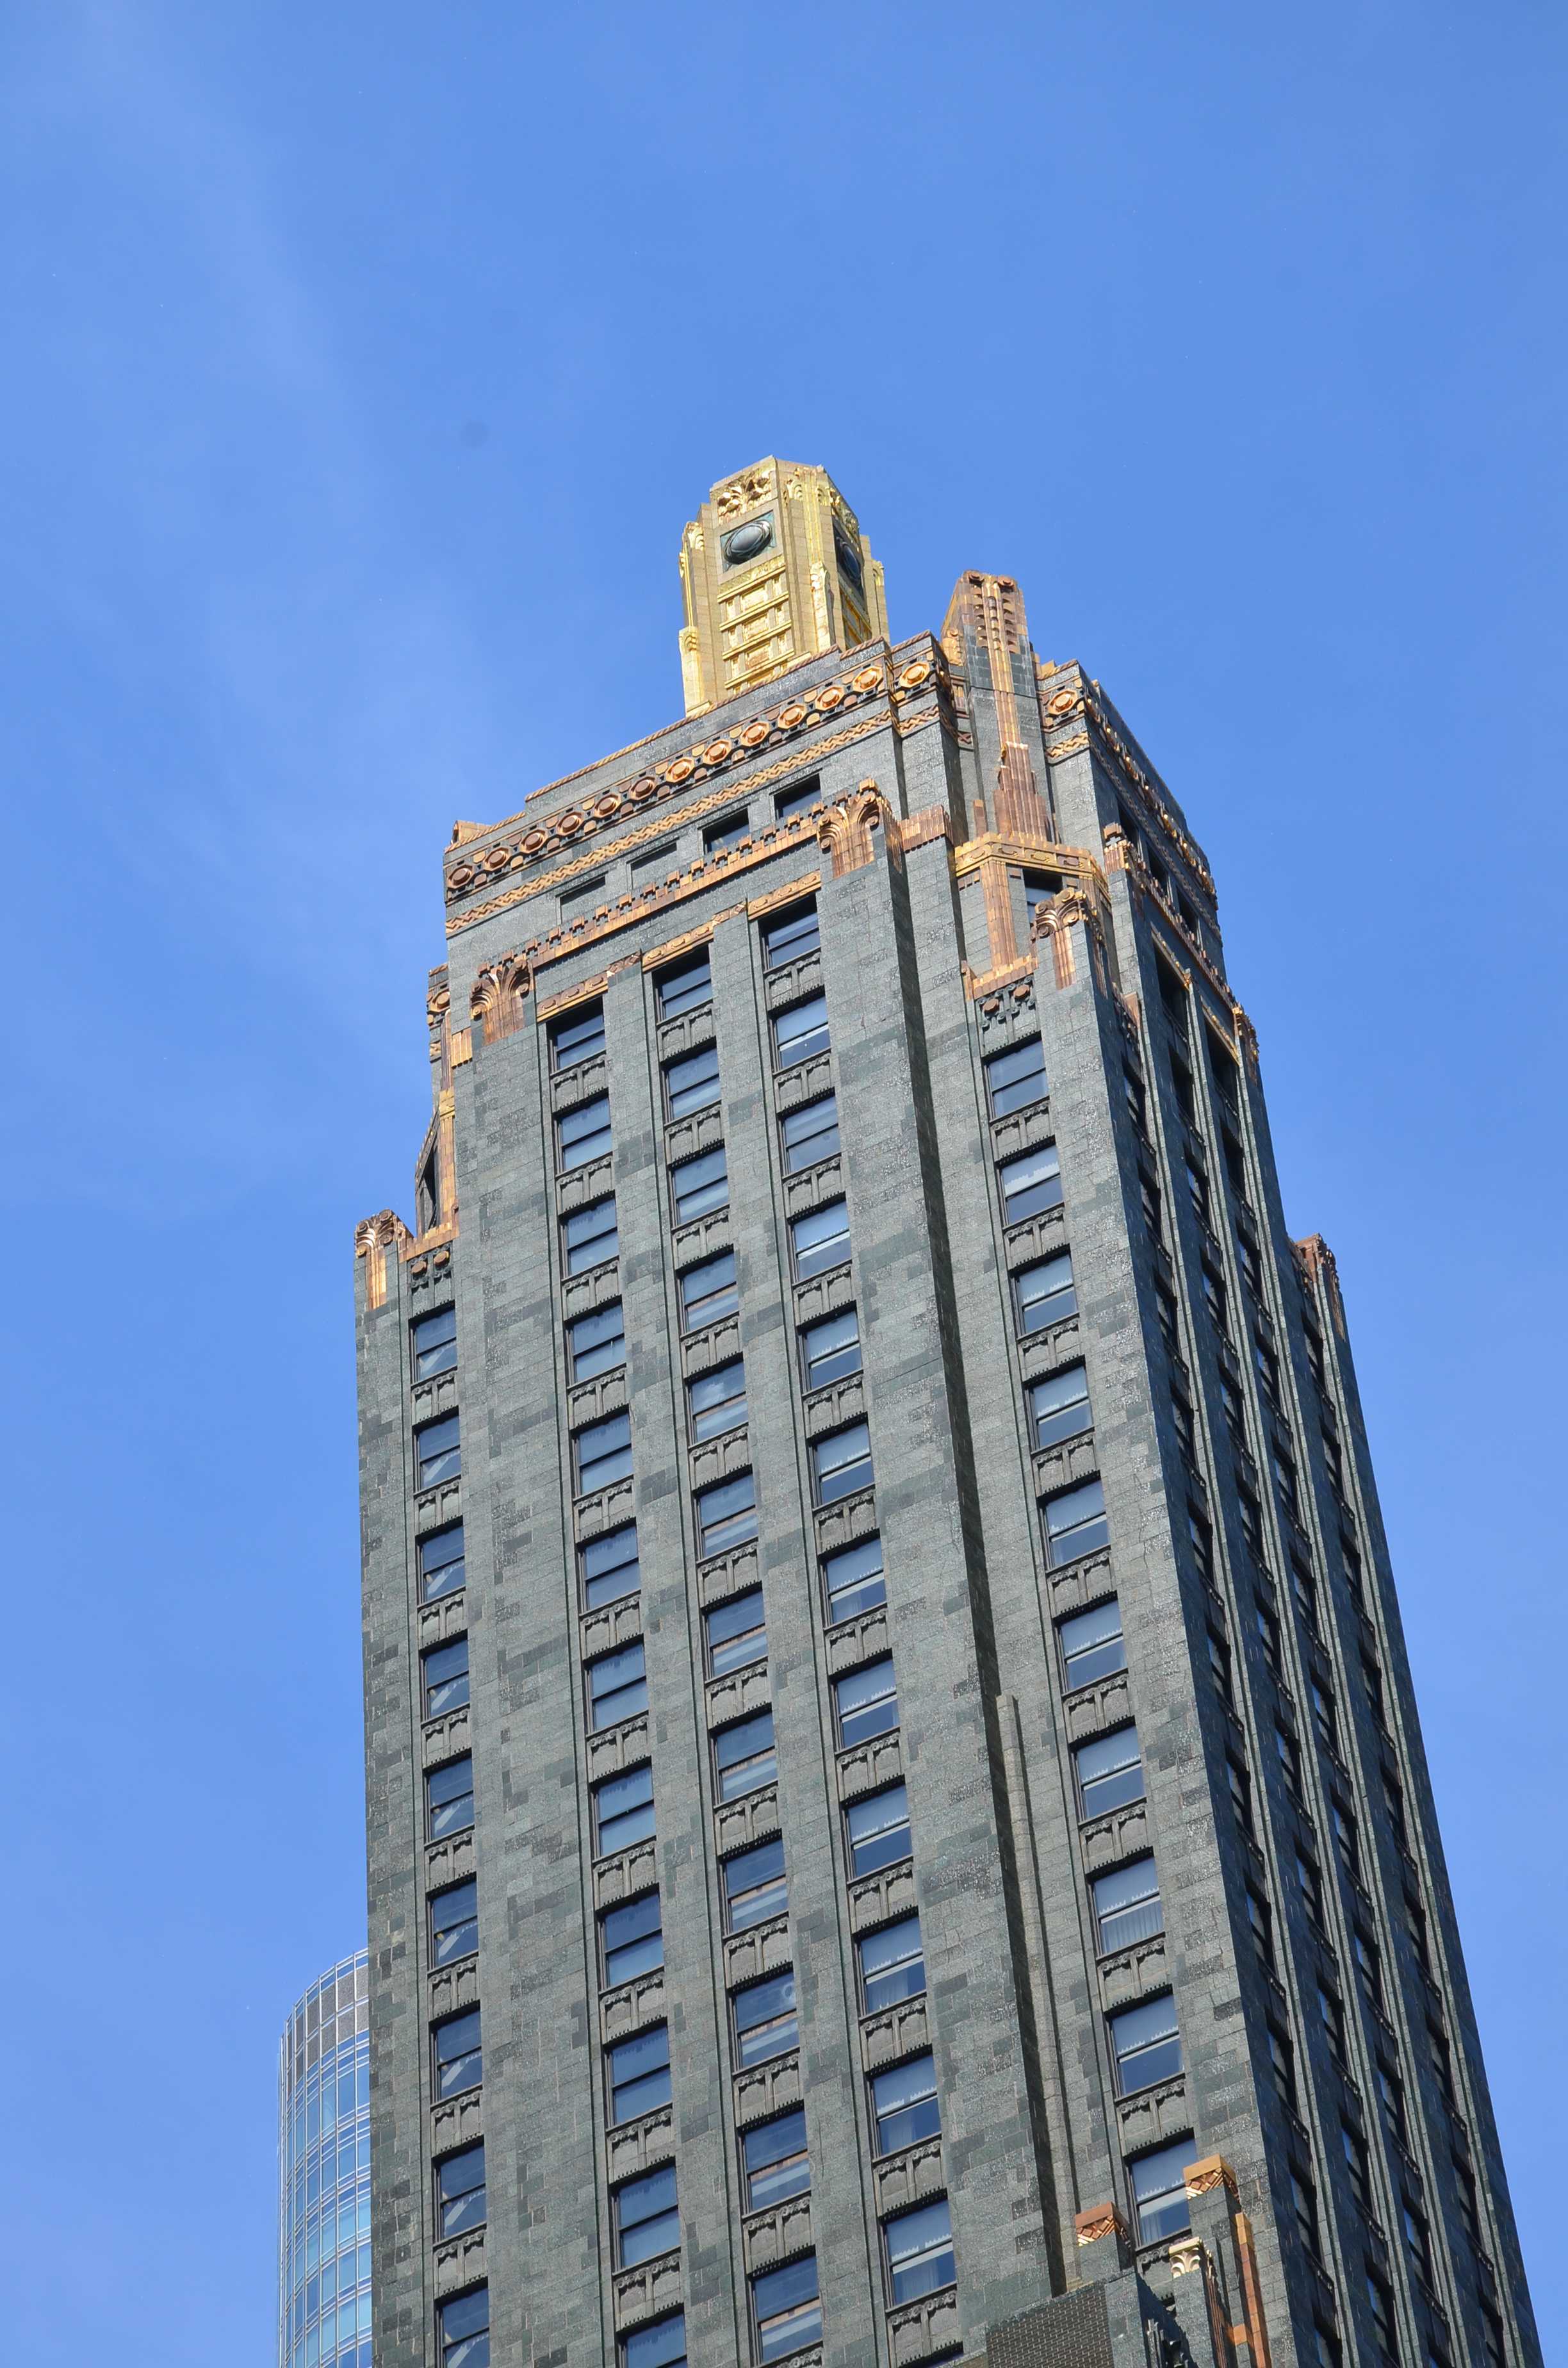 Carbide and Carbon Building in Chicago, Illinois